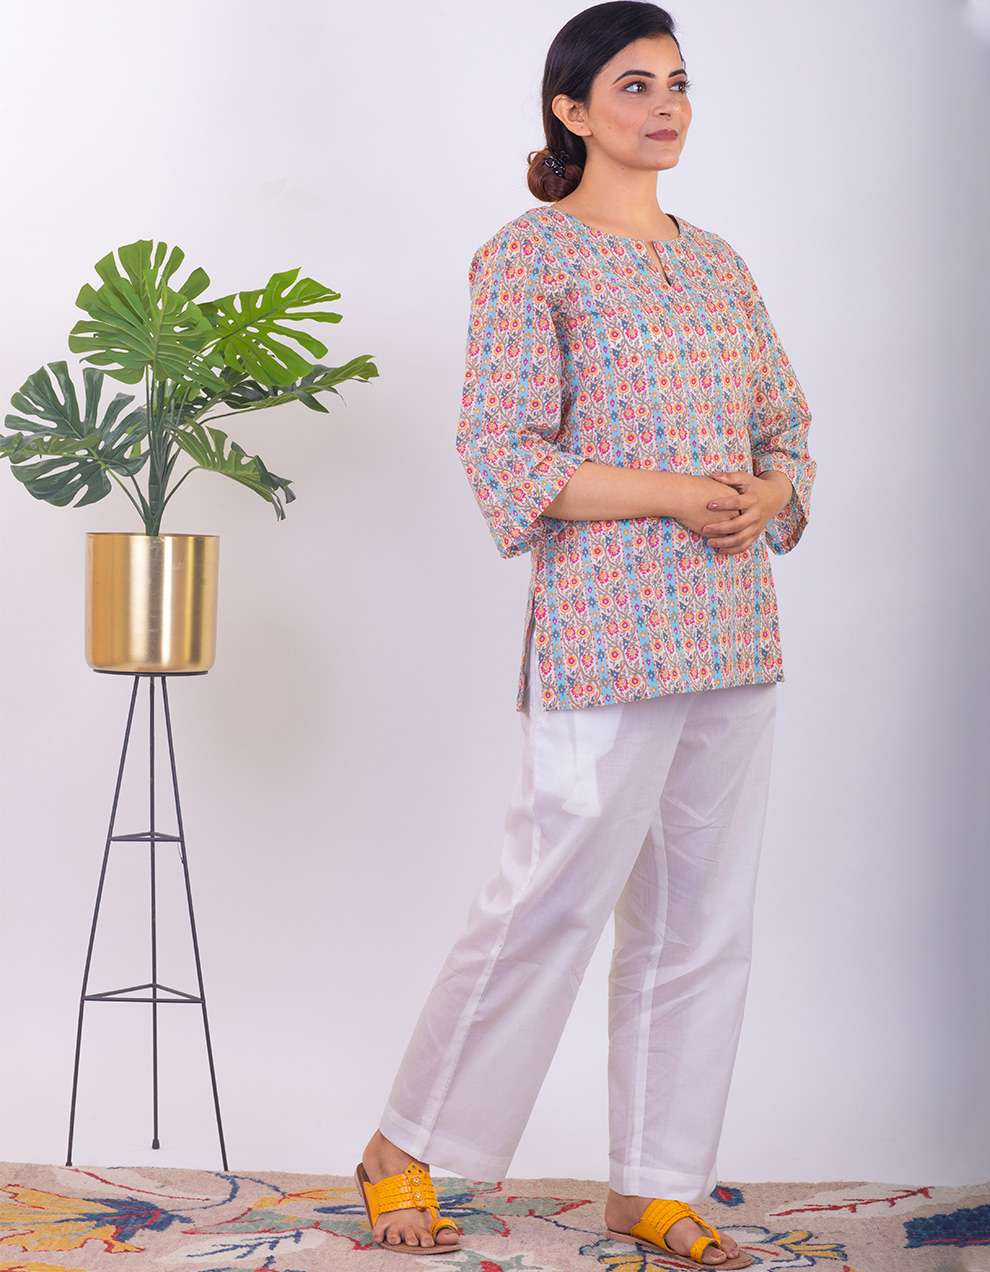 Best cotton Pants designs, India's best white cotton pants designs, White cotton pants designers in India, Buy white cotton pants for women online at the best price